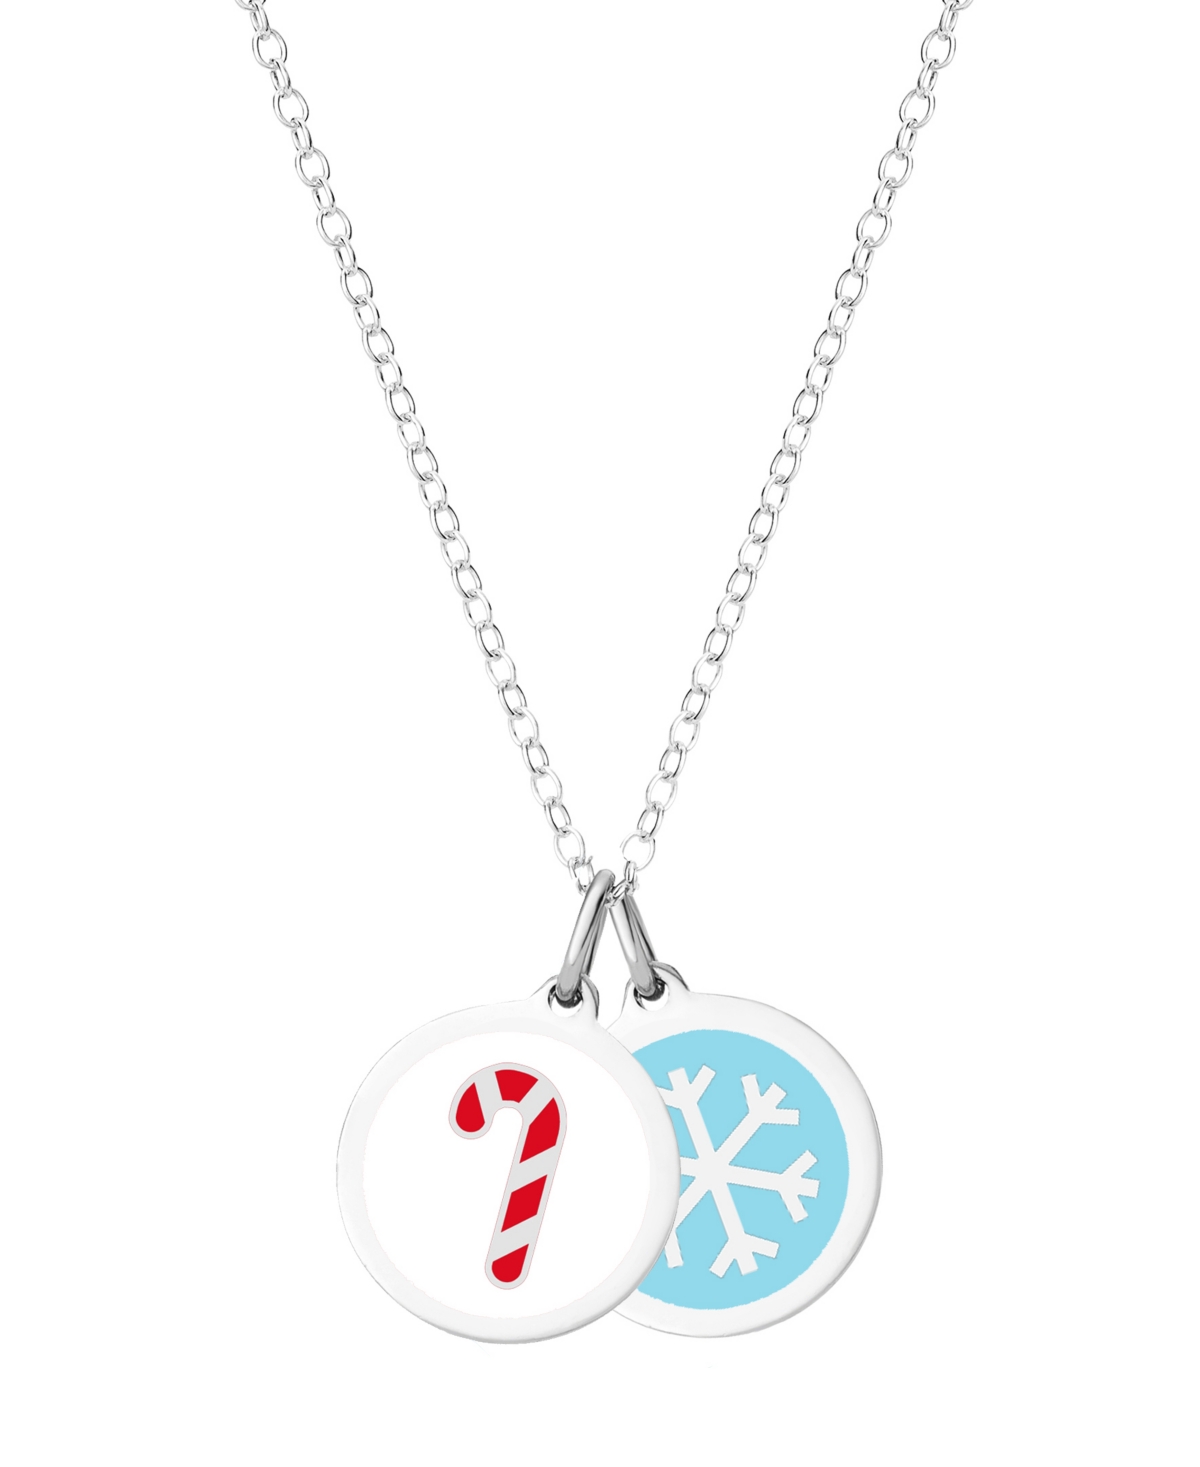 Candy Cane & Mini Snowflake Necklace in Sterling Silver - Multi